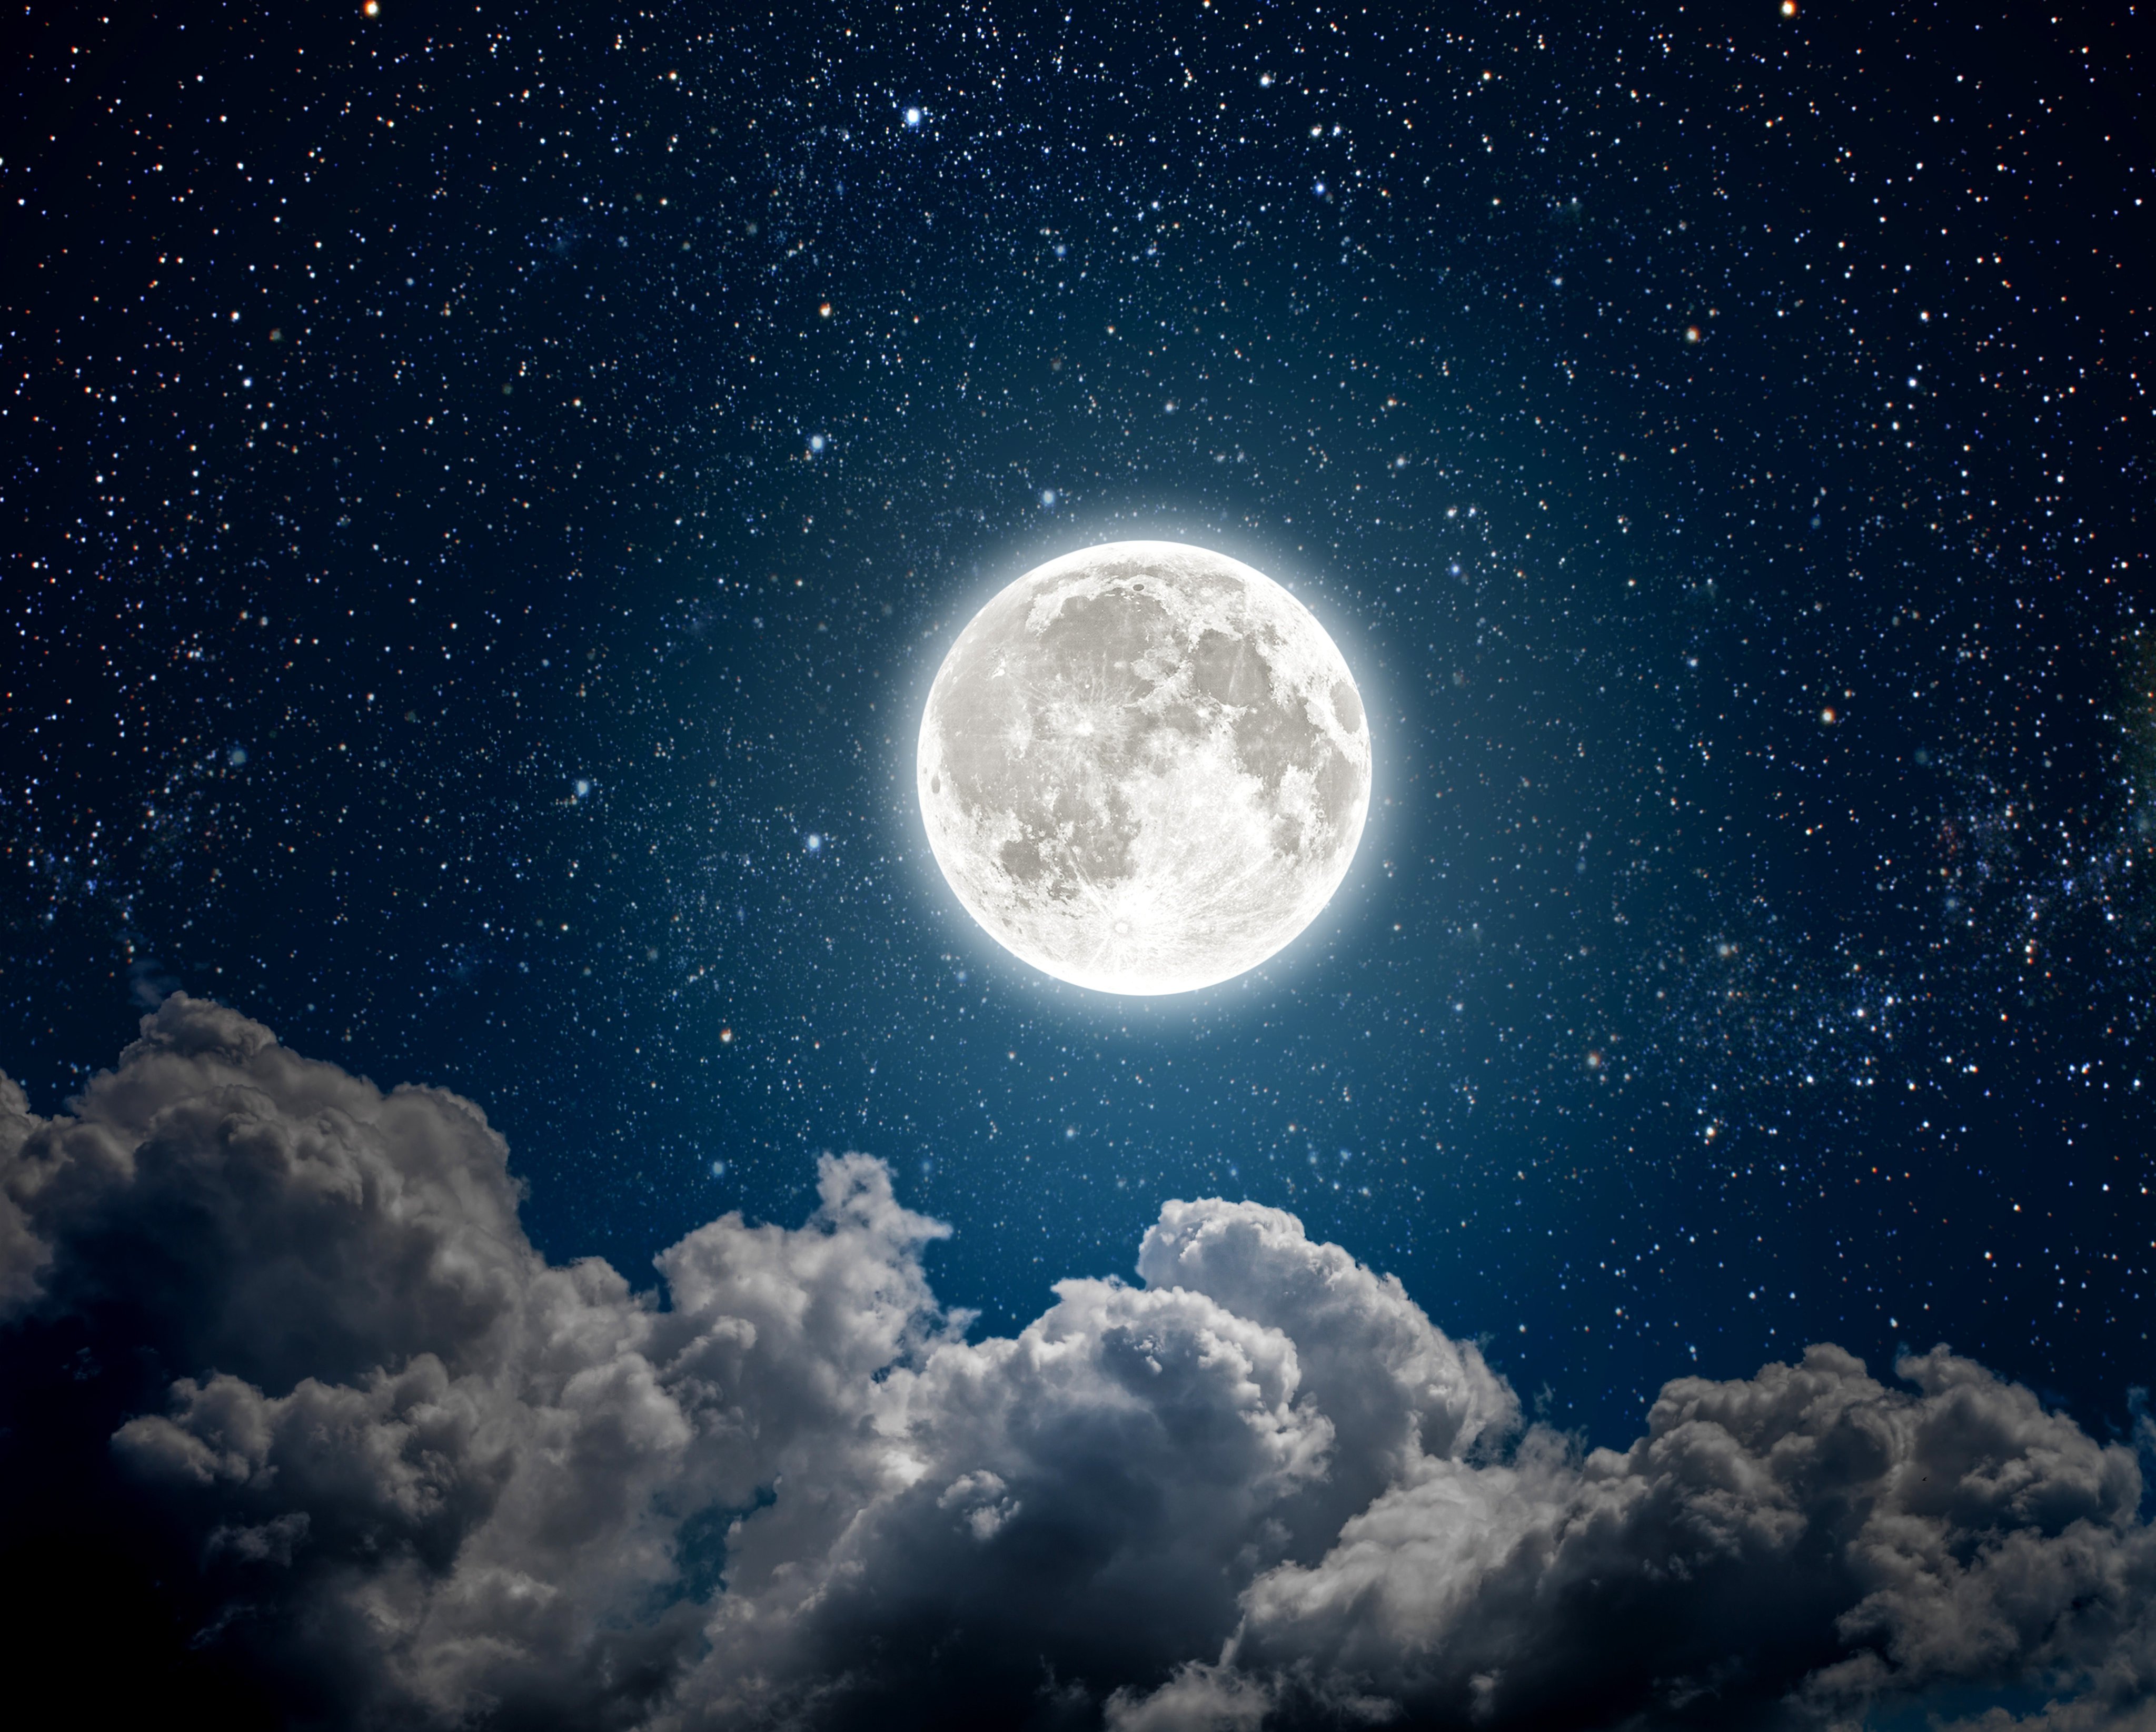 Where does the English word moon come from? How about its Indian equivalent, Chandra? And why did Nasa name its moon missions after a sun god? Your lunar language questions answered. Photo: Shutterstock